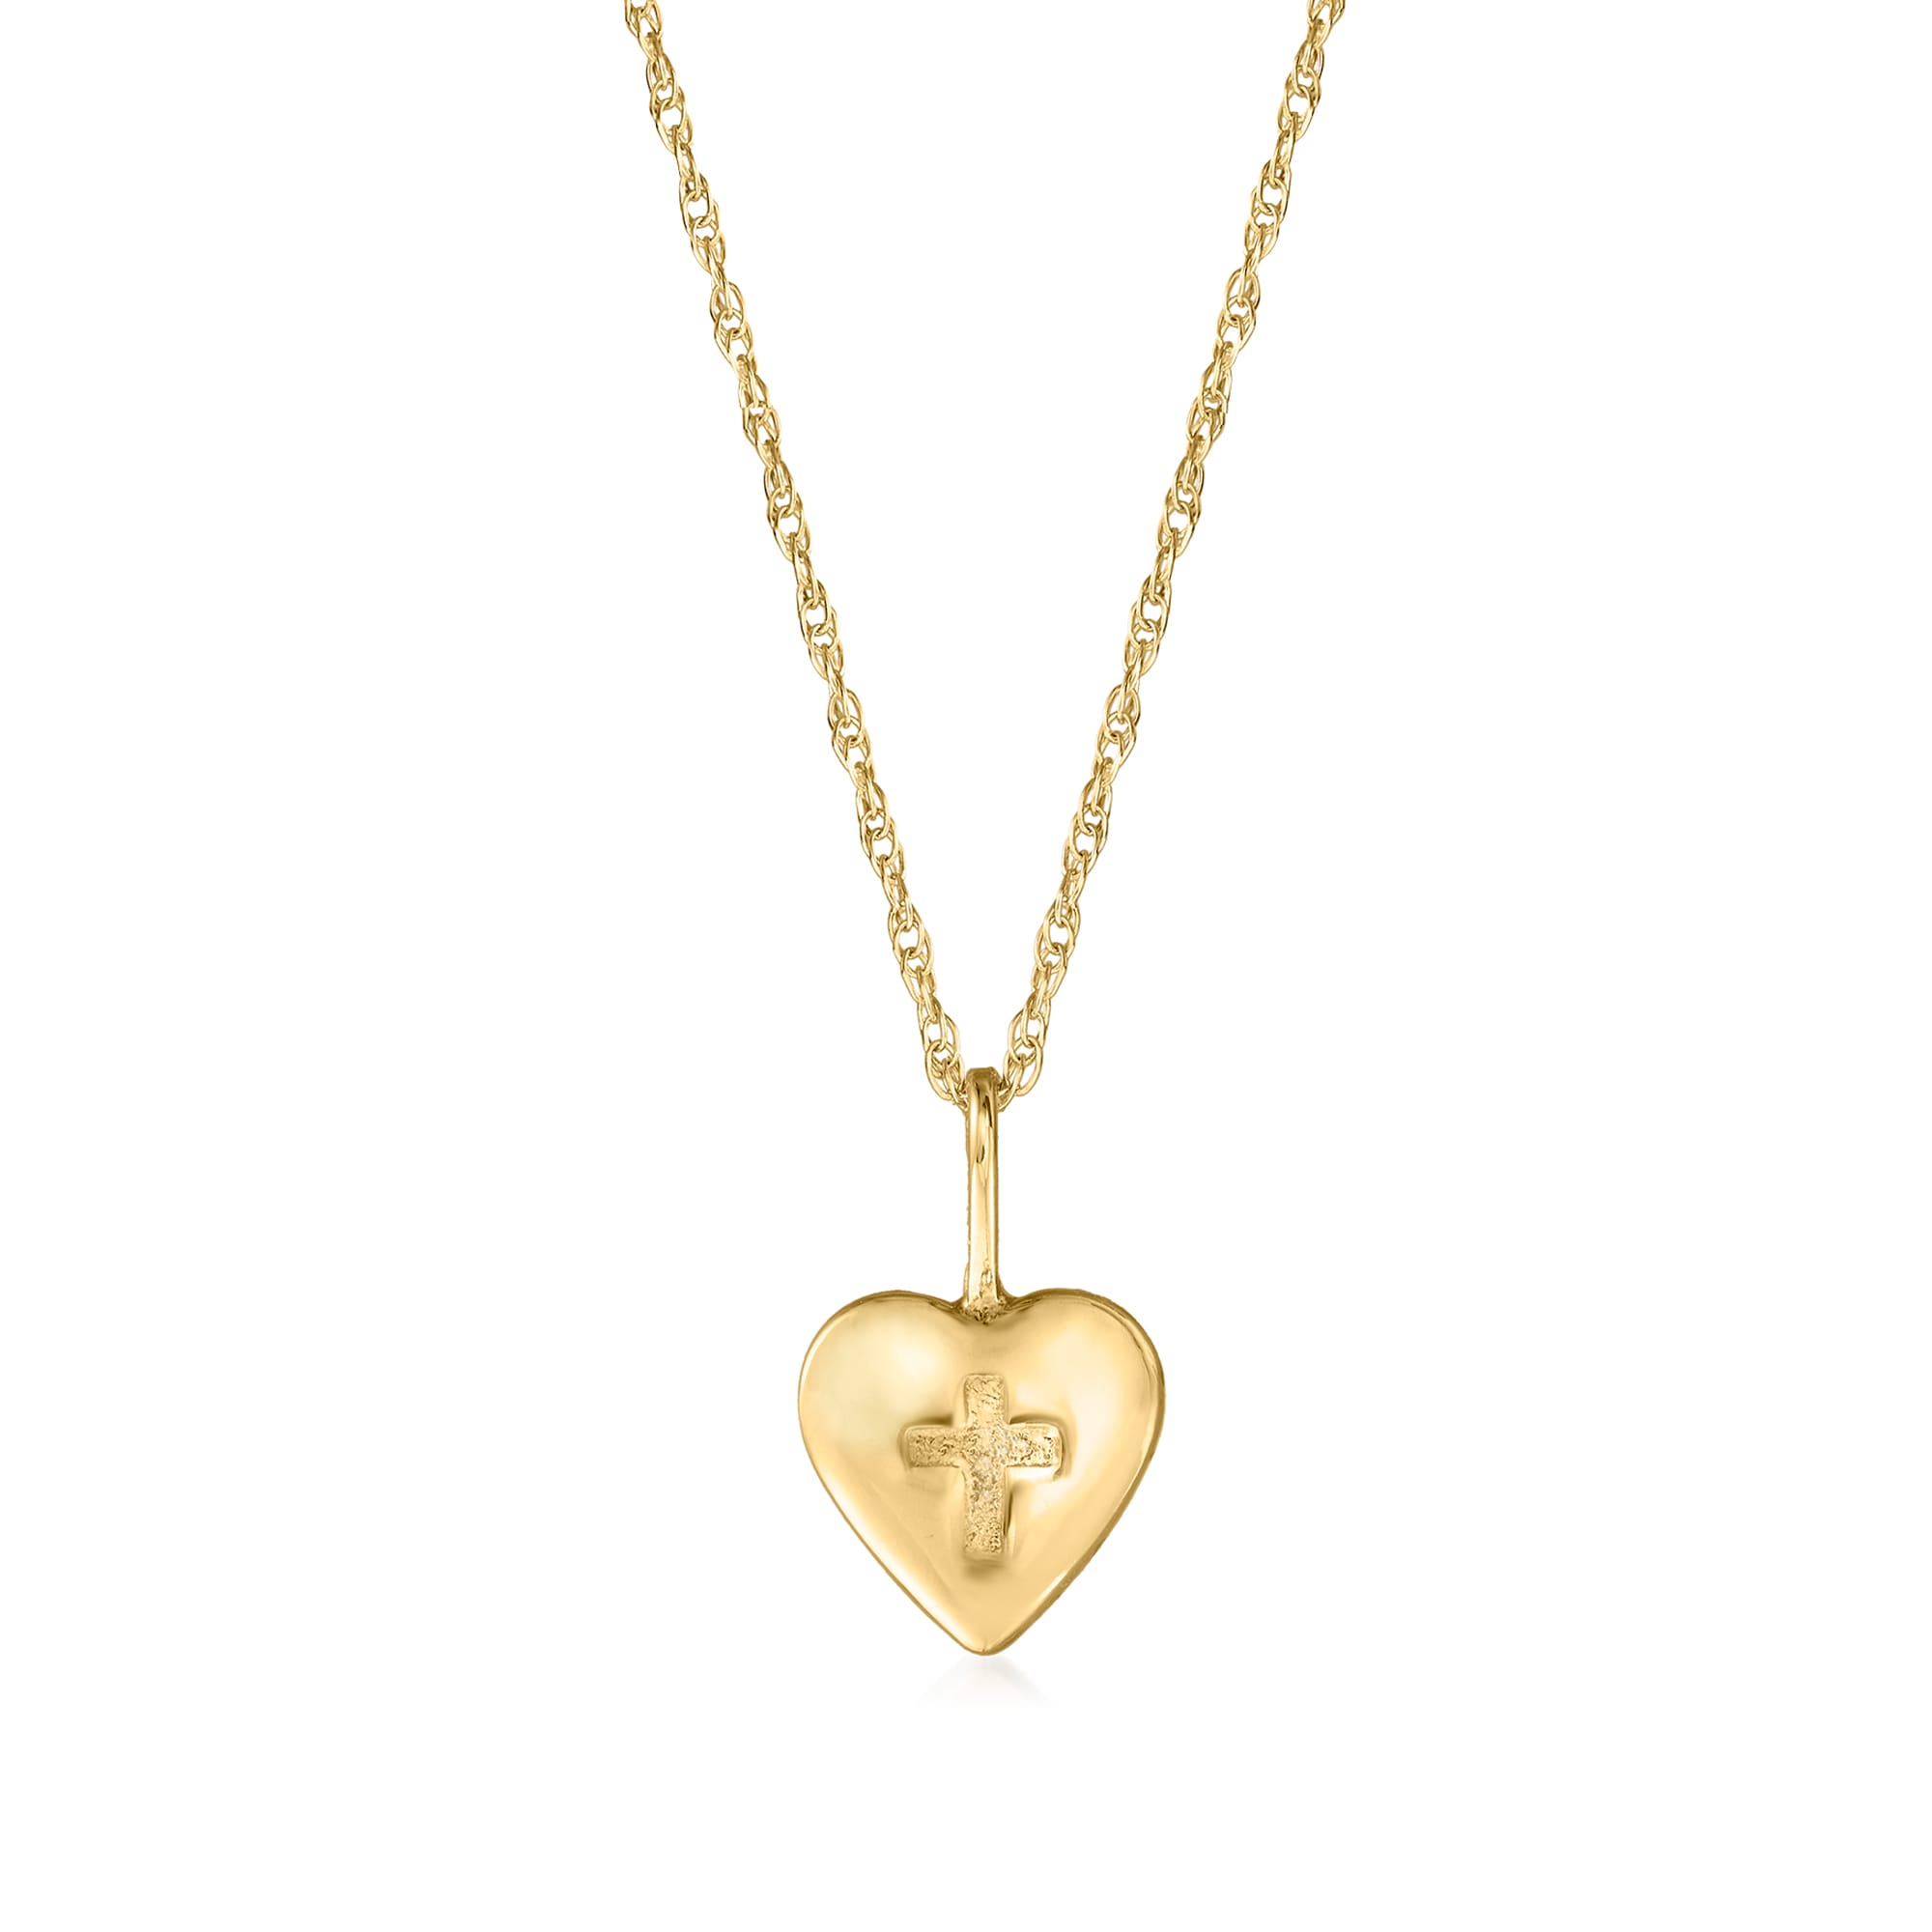 Ross-Simons - Single-Initial - Baby's 14kt Yellow Gold Heart Locket Necklace. Size 13